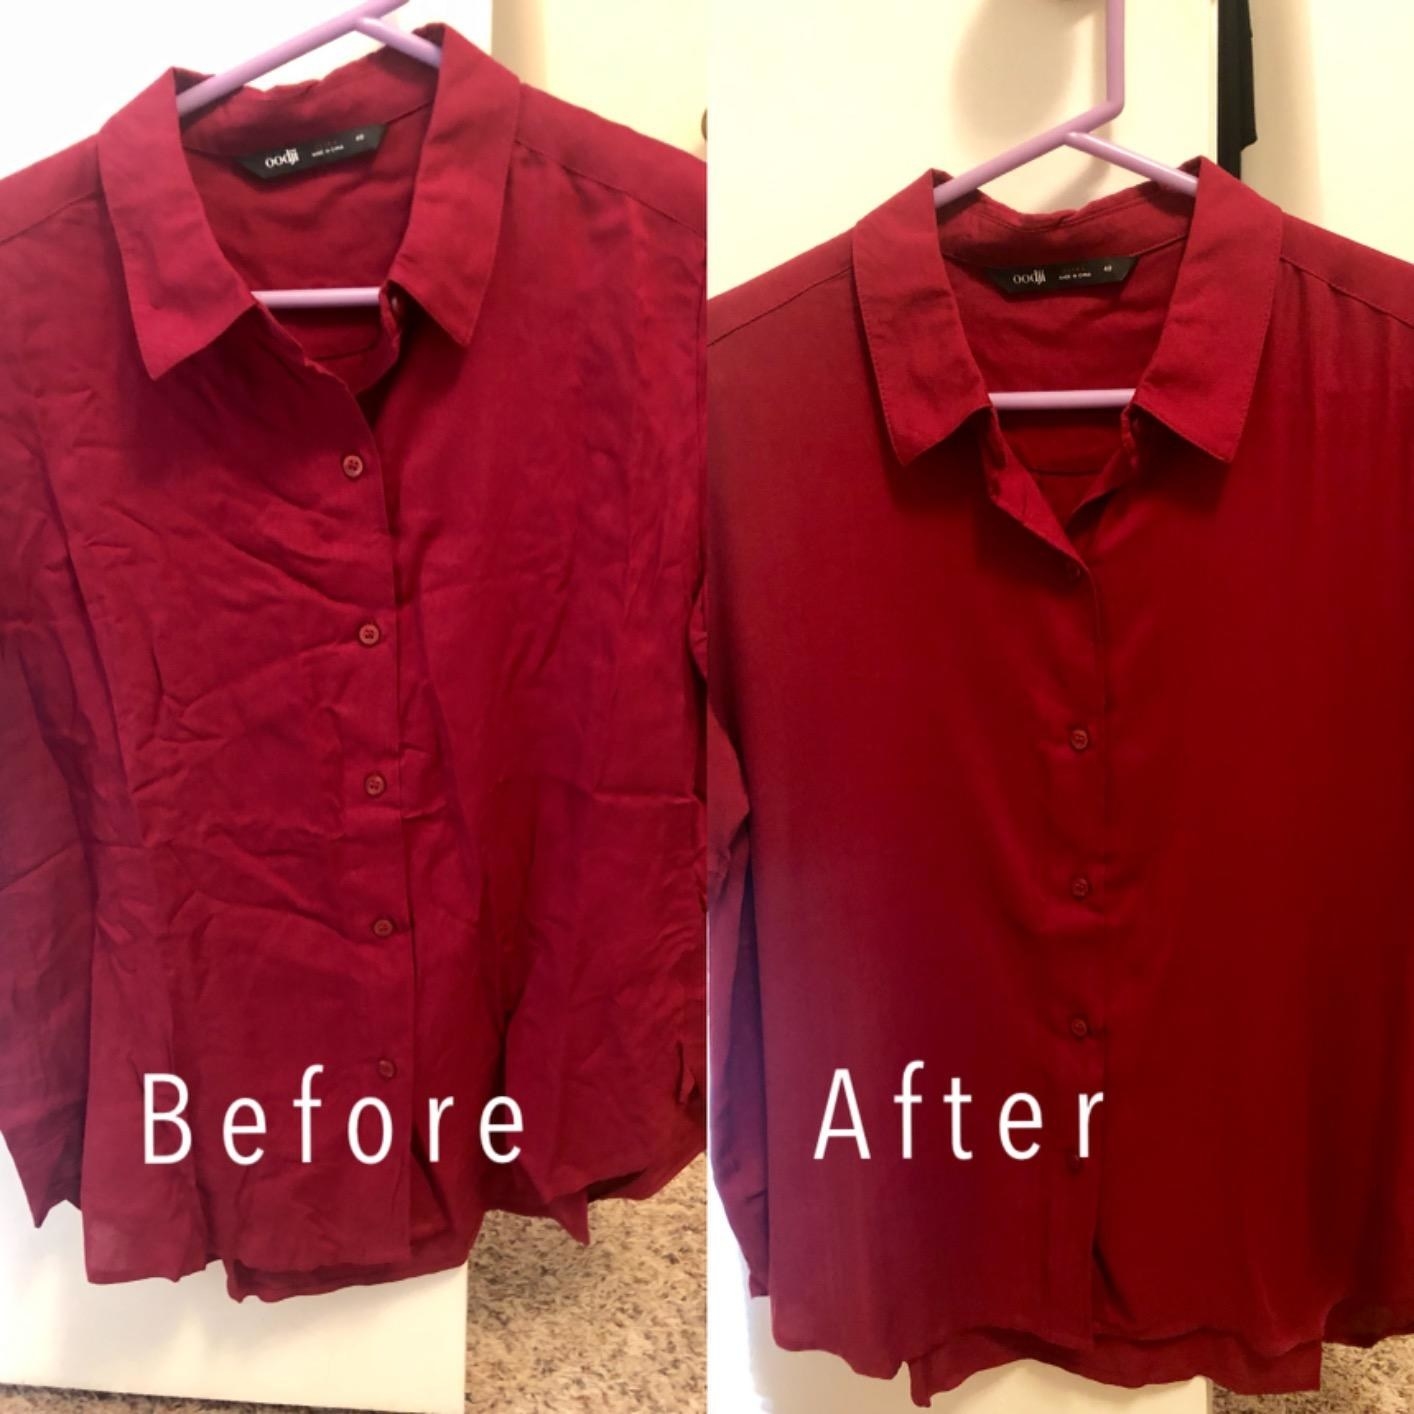 Reviewer&#x27;s photos of a red button-up shirt before and after using the steamer